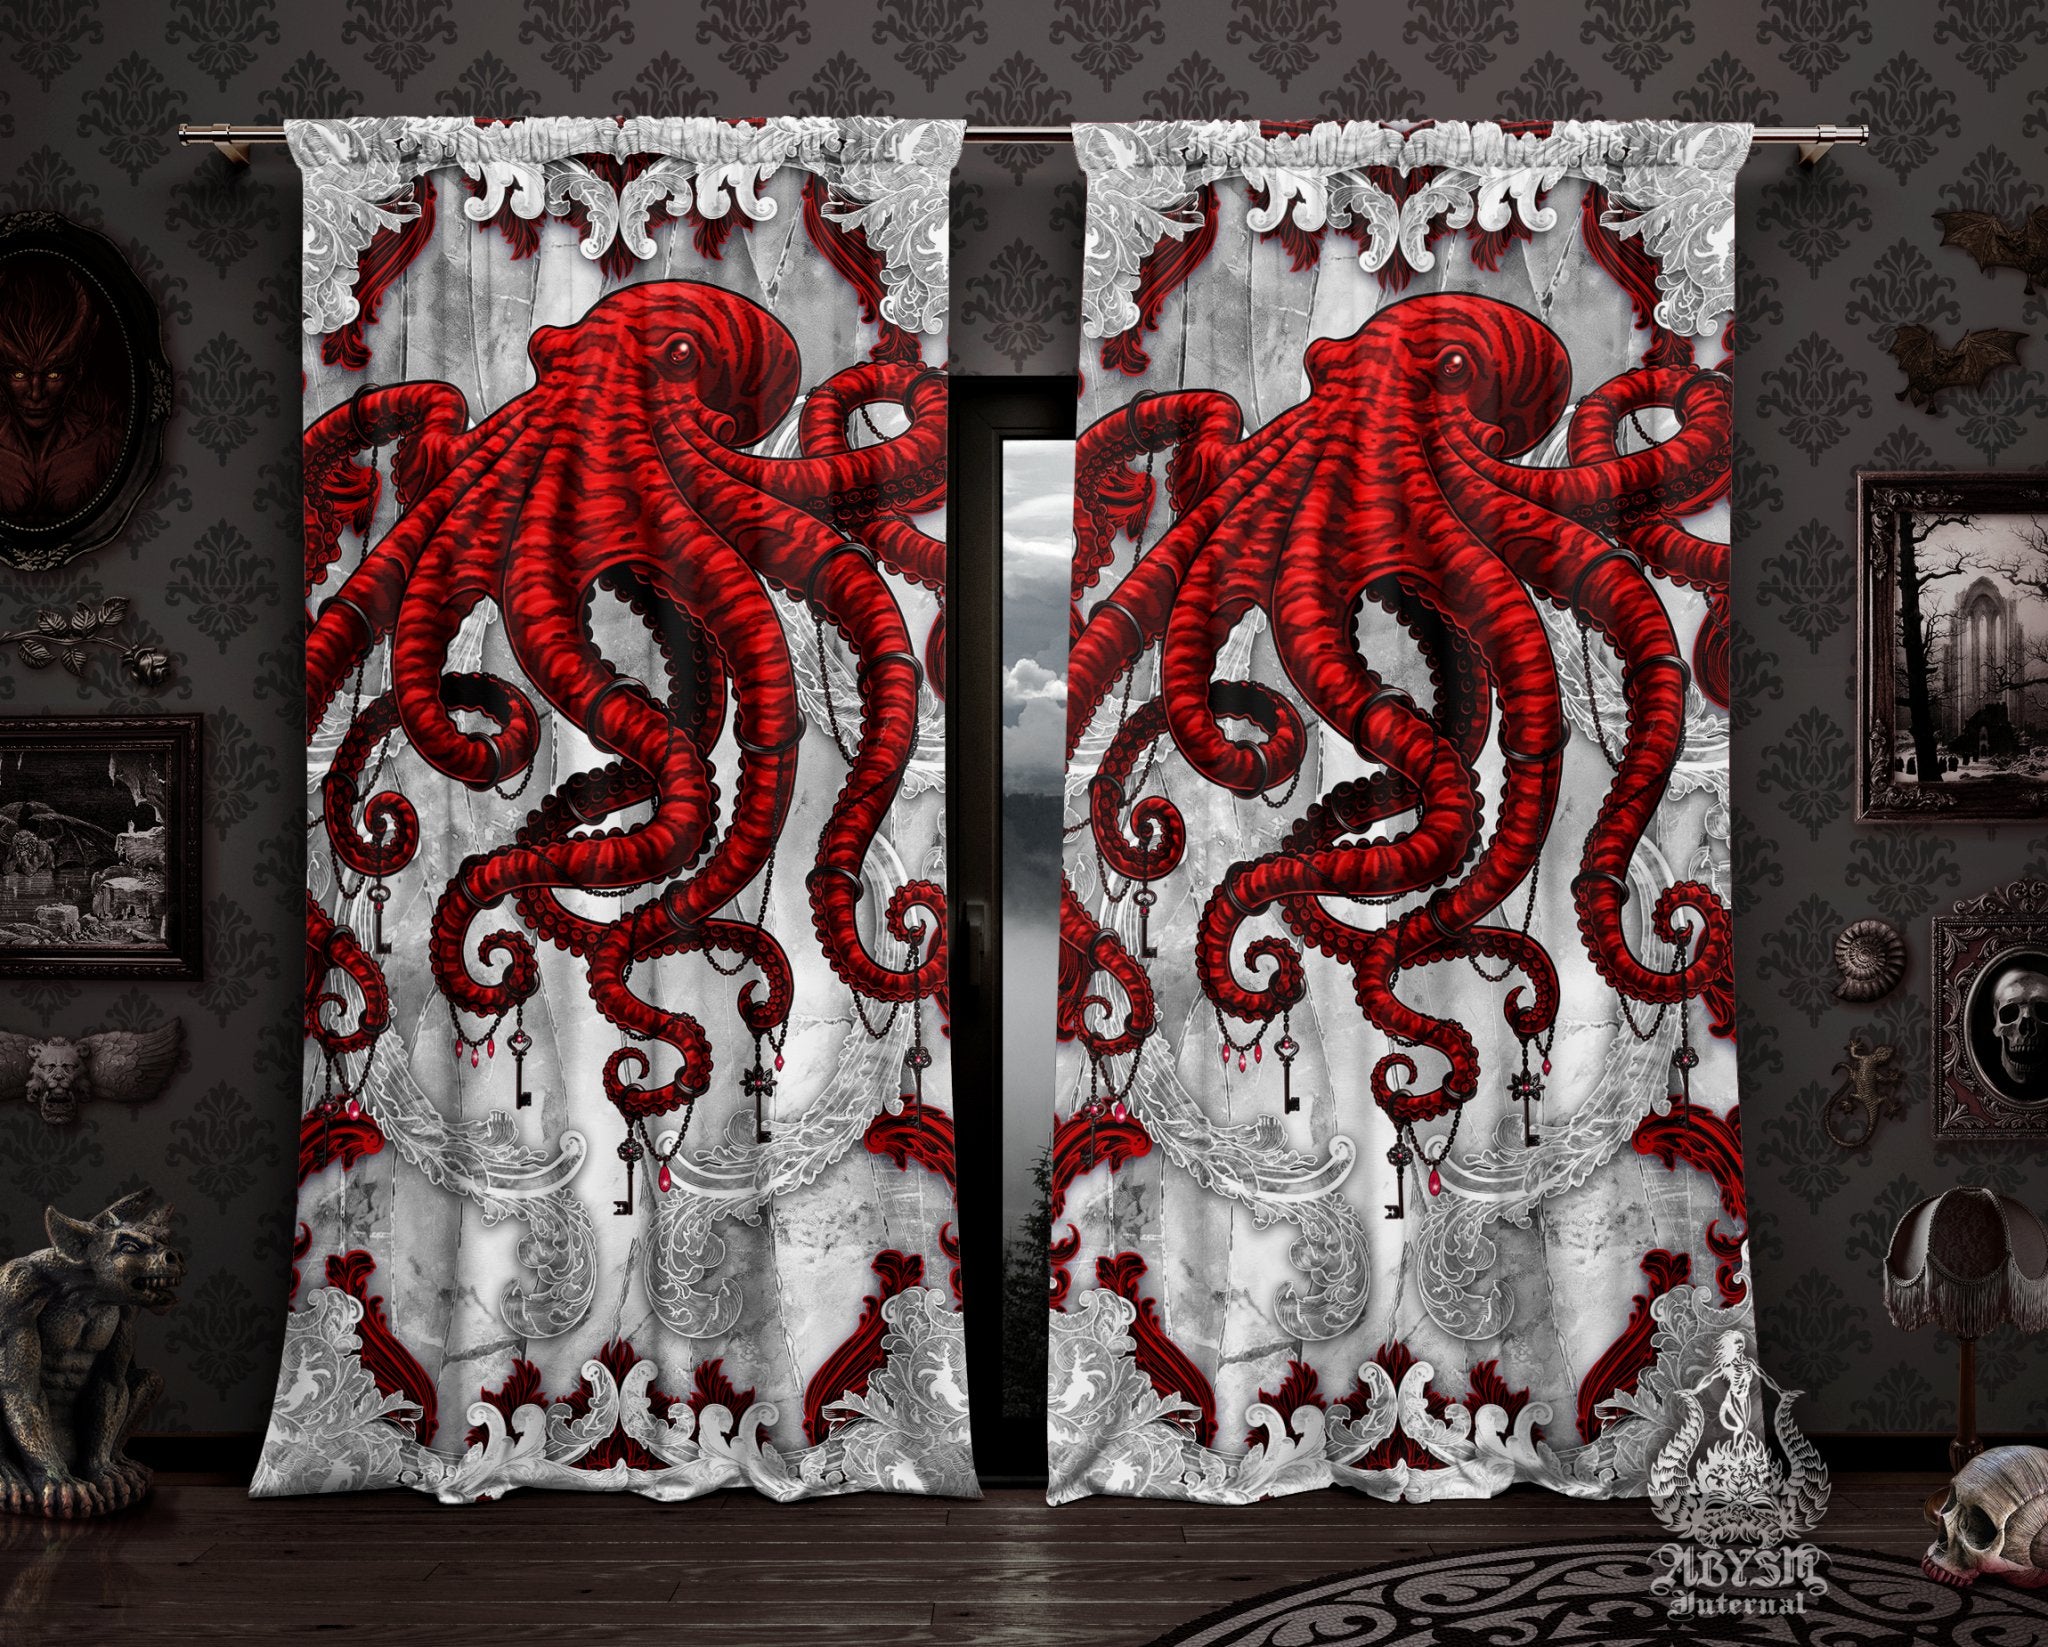 Fantasy Curtains, 50x84' Printed Window Panels, Octopus Art Print, Gothic Home Decor - Bloody White Goth - Abysm Internal